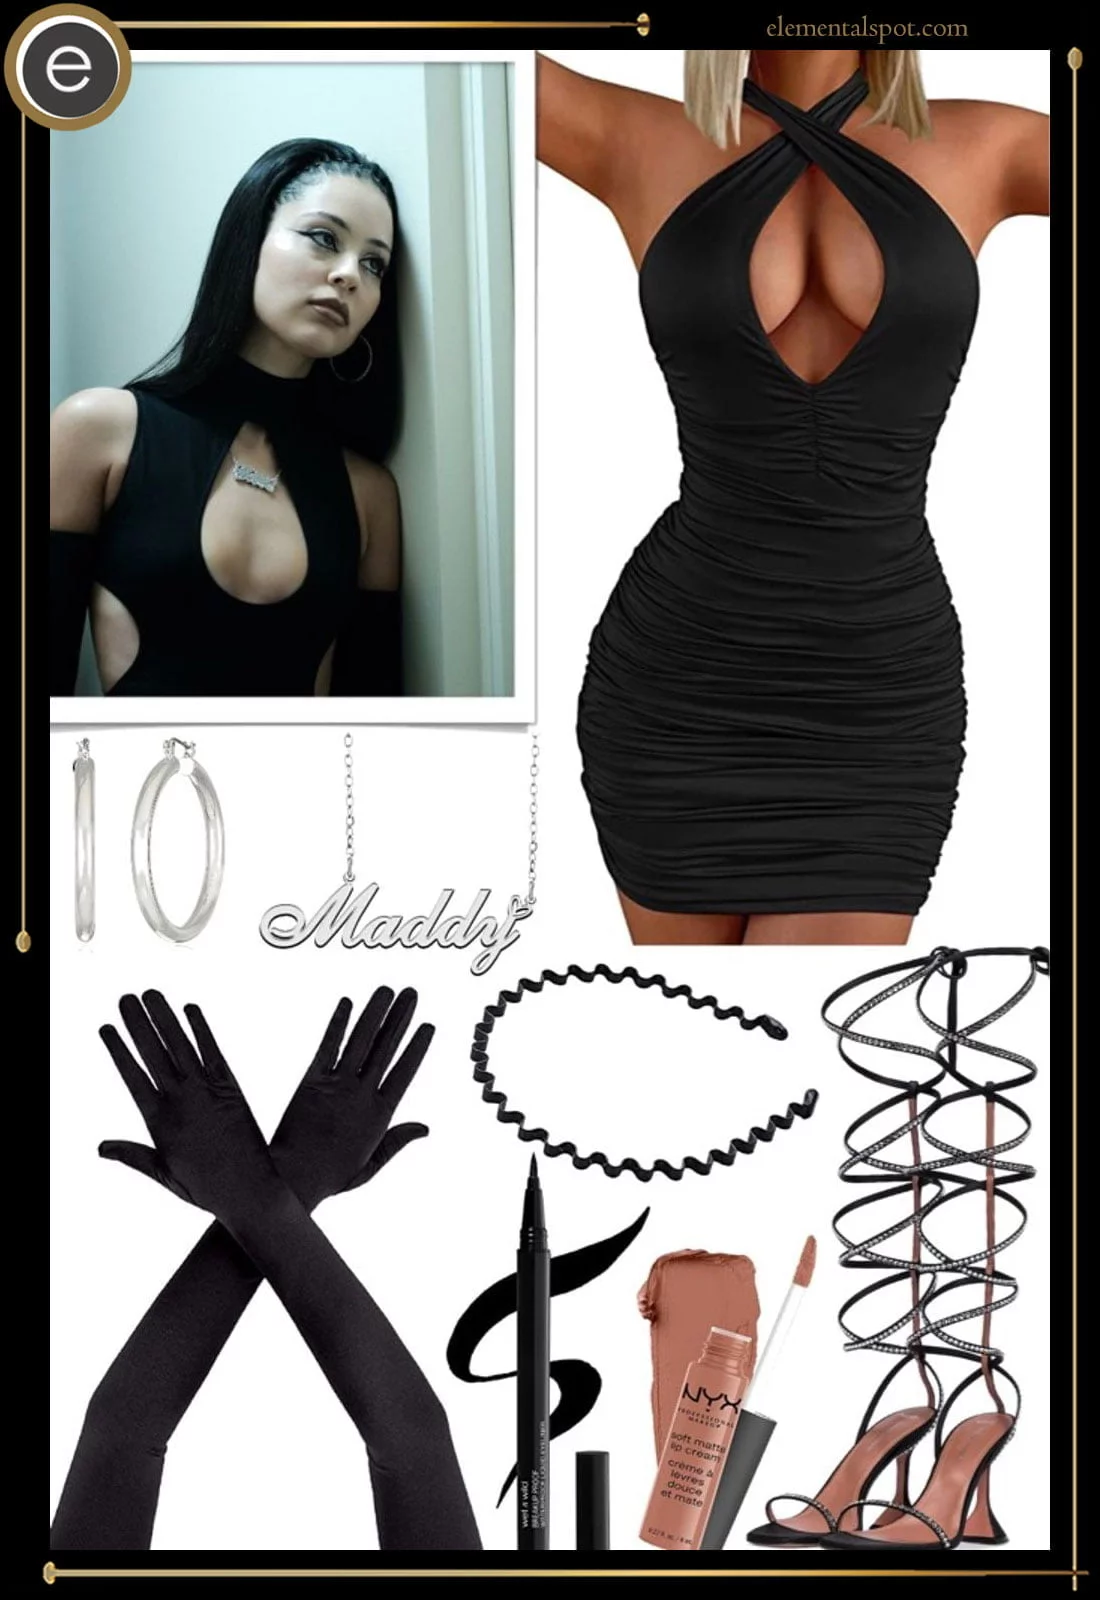 Steal the Look - Dress Like Maddy Perez from Euphoria 2 - Elemental Spot